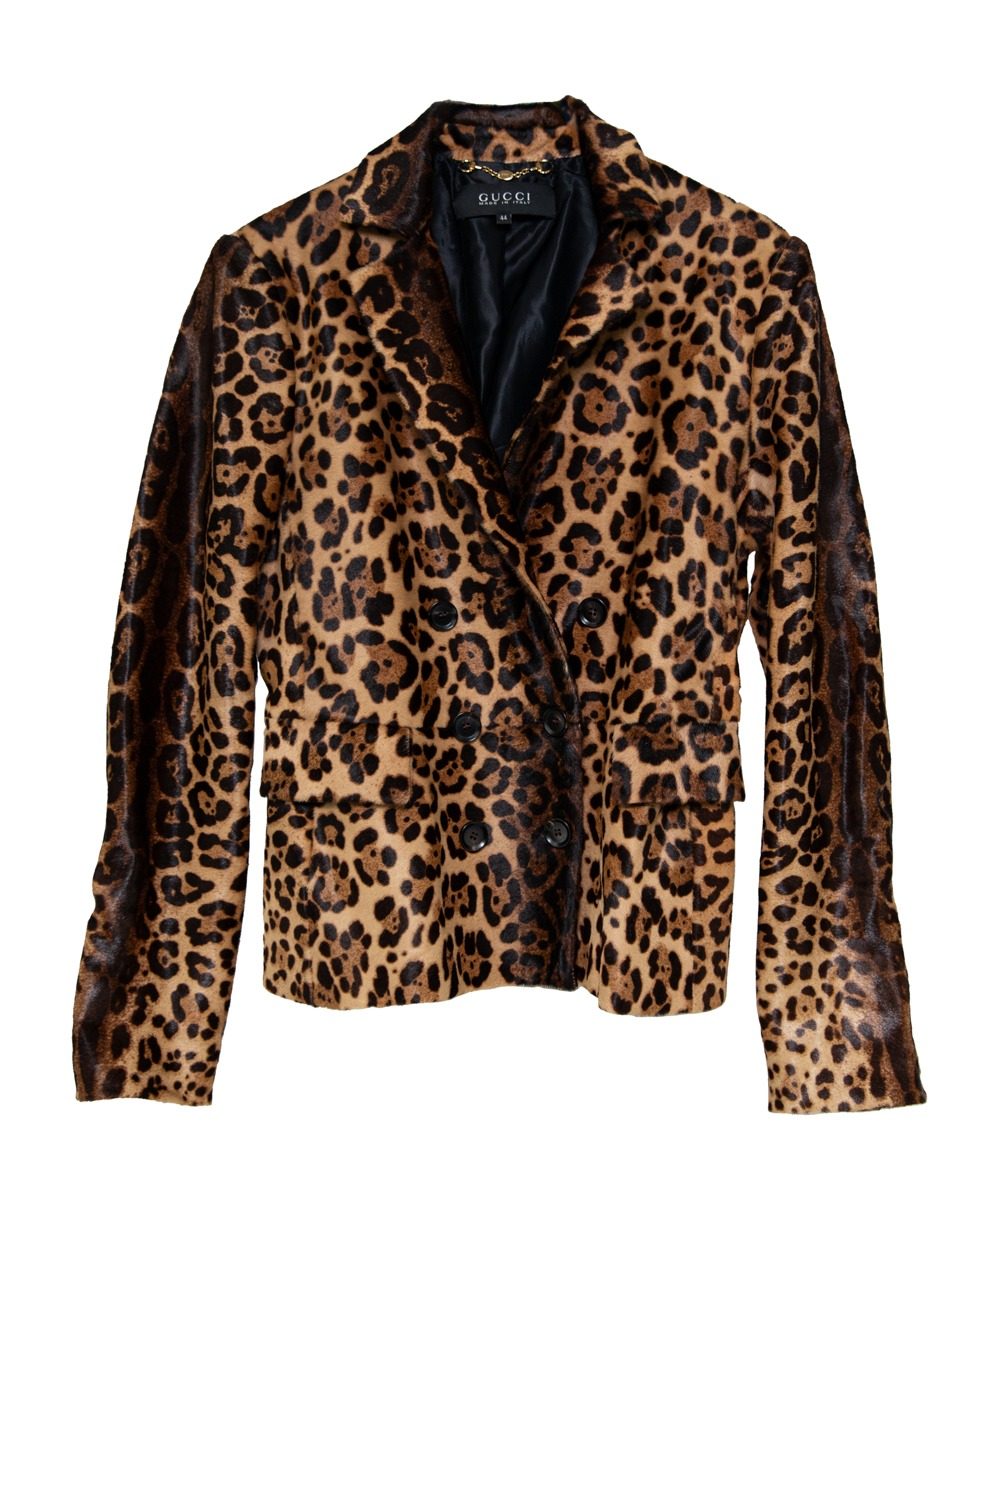 Thumbnail of http://Gucci%20Vintage%20Blazer%20mit%20Leoparden-Muster